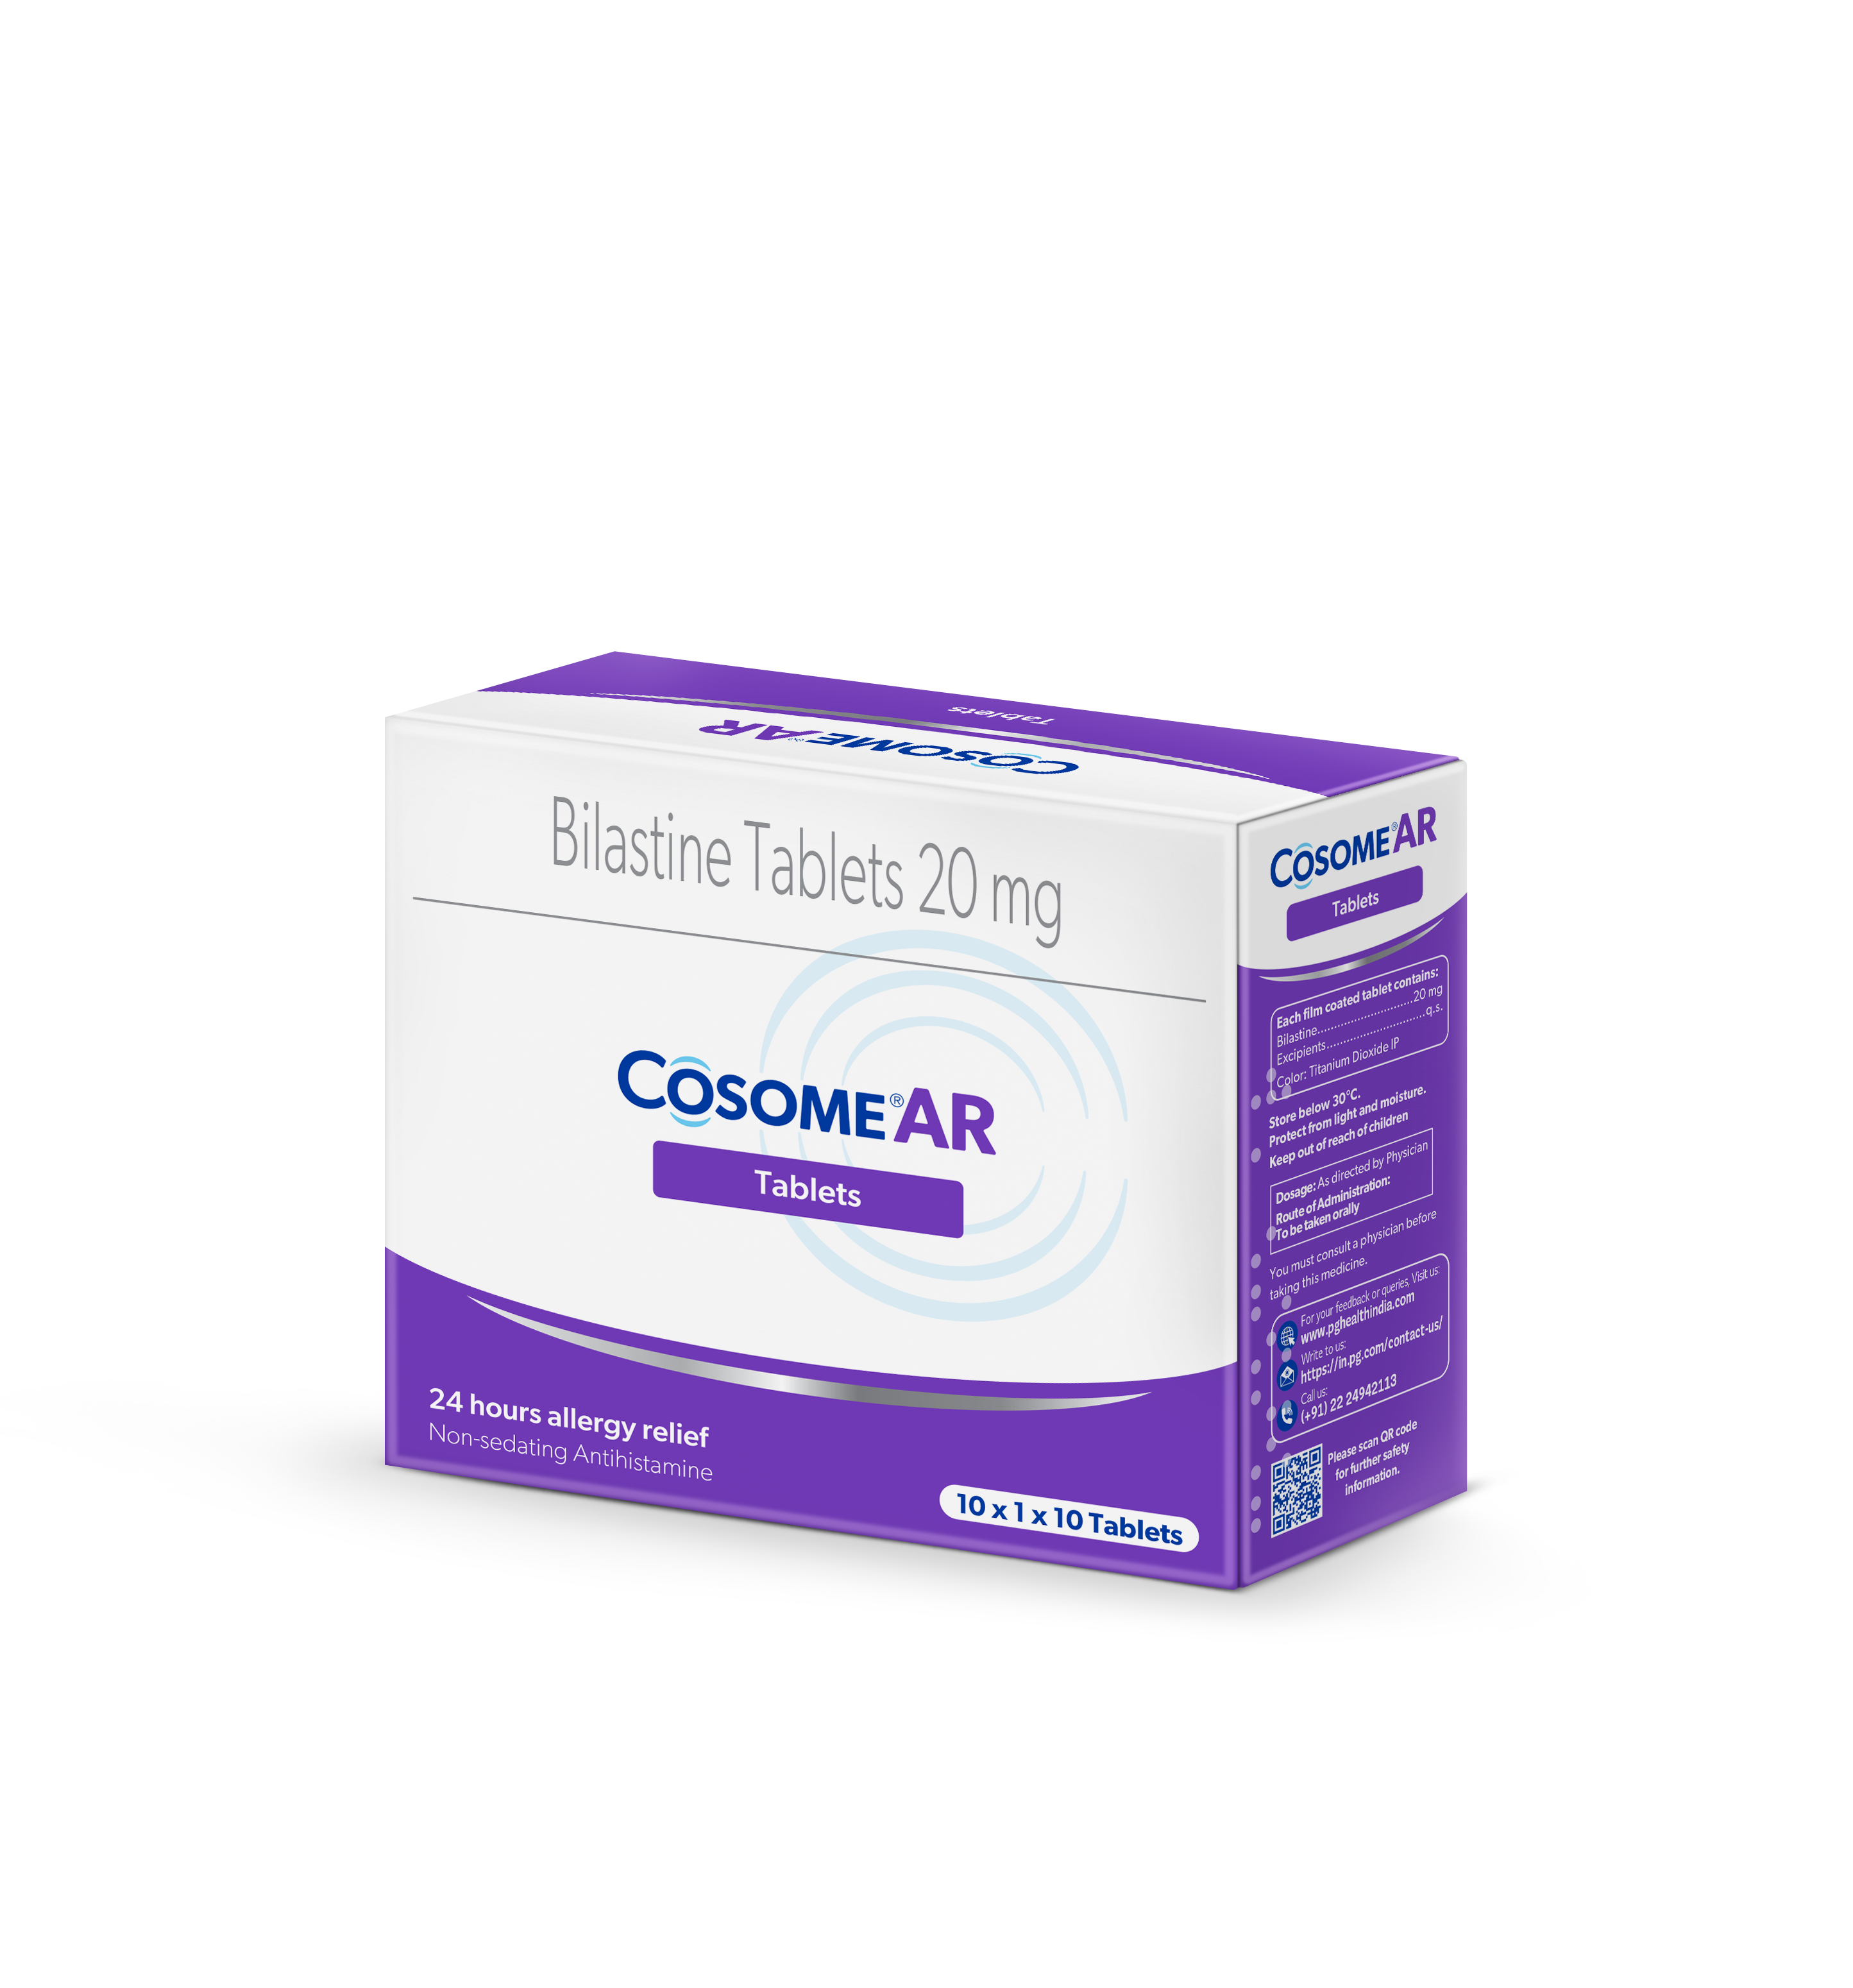 CosomeAR product image